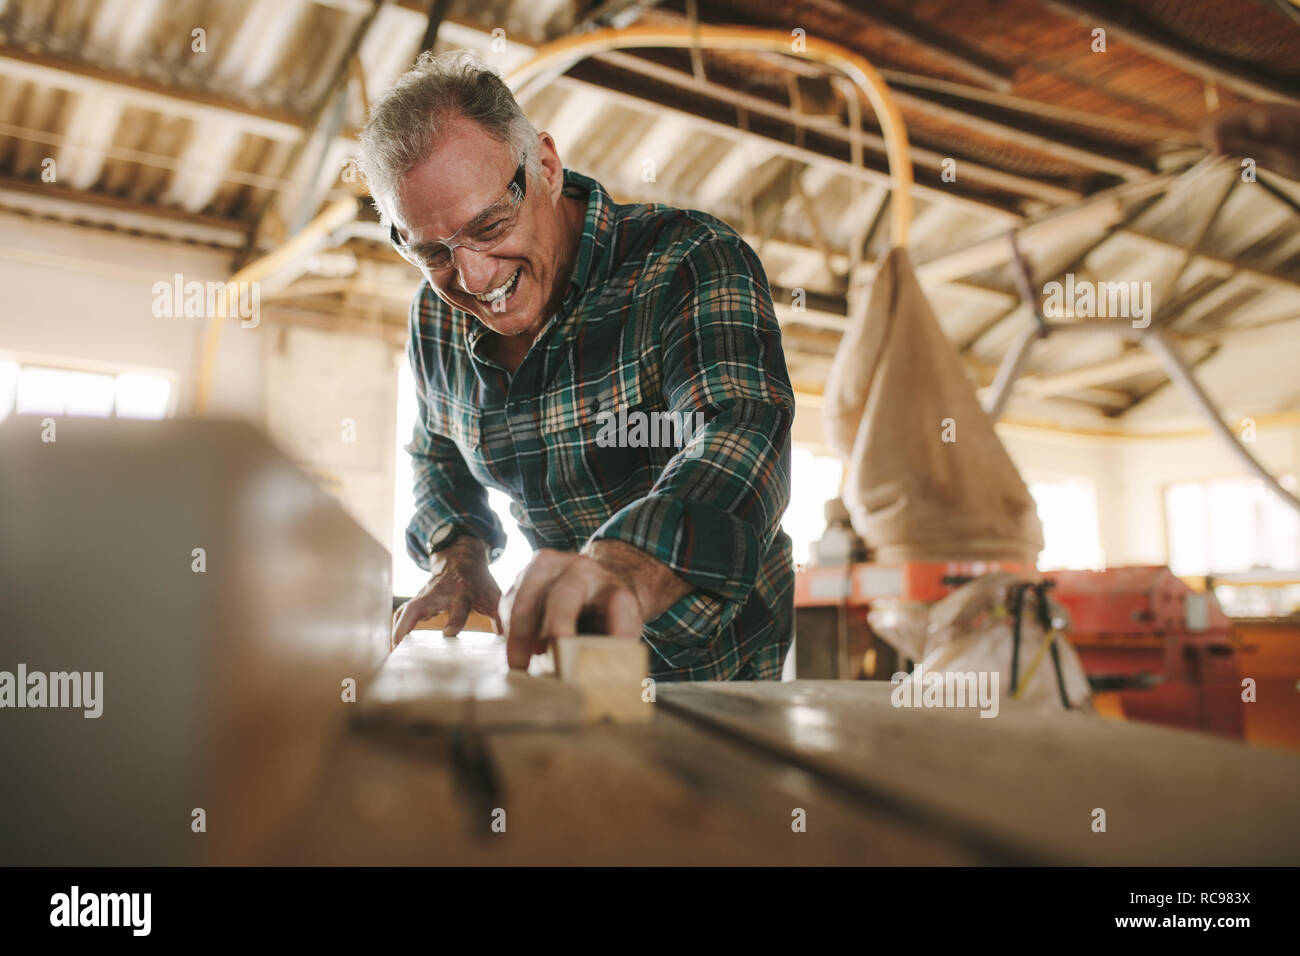 Happy senior male carpenter cutting wood planks on table saw machine. Smiling mature man working in carpentry workshop. Stock Photo